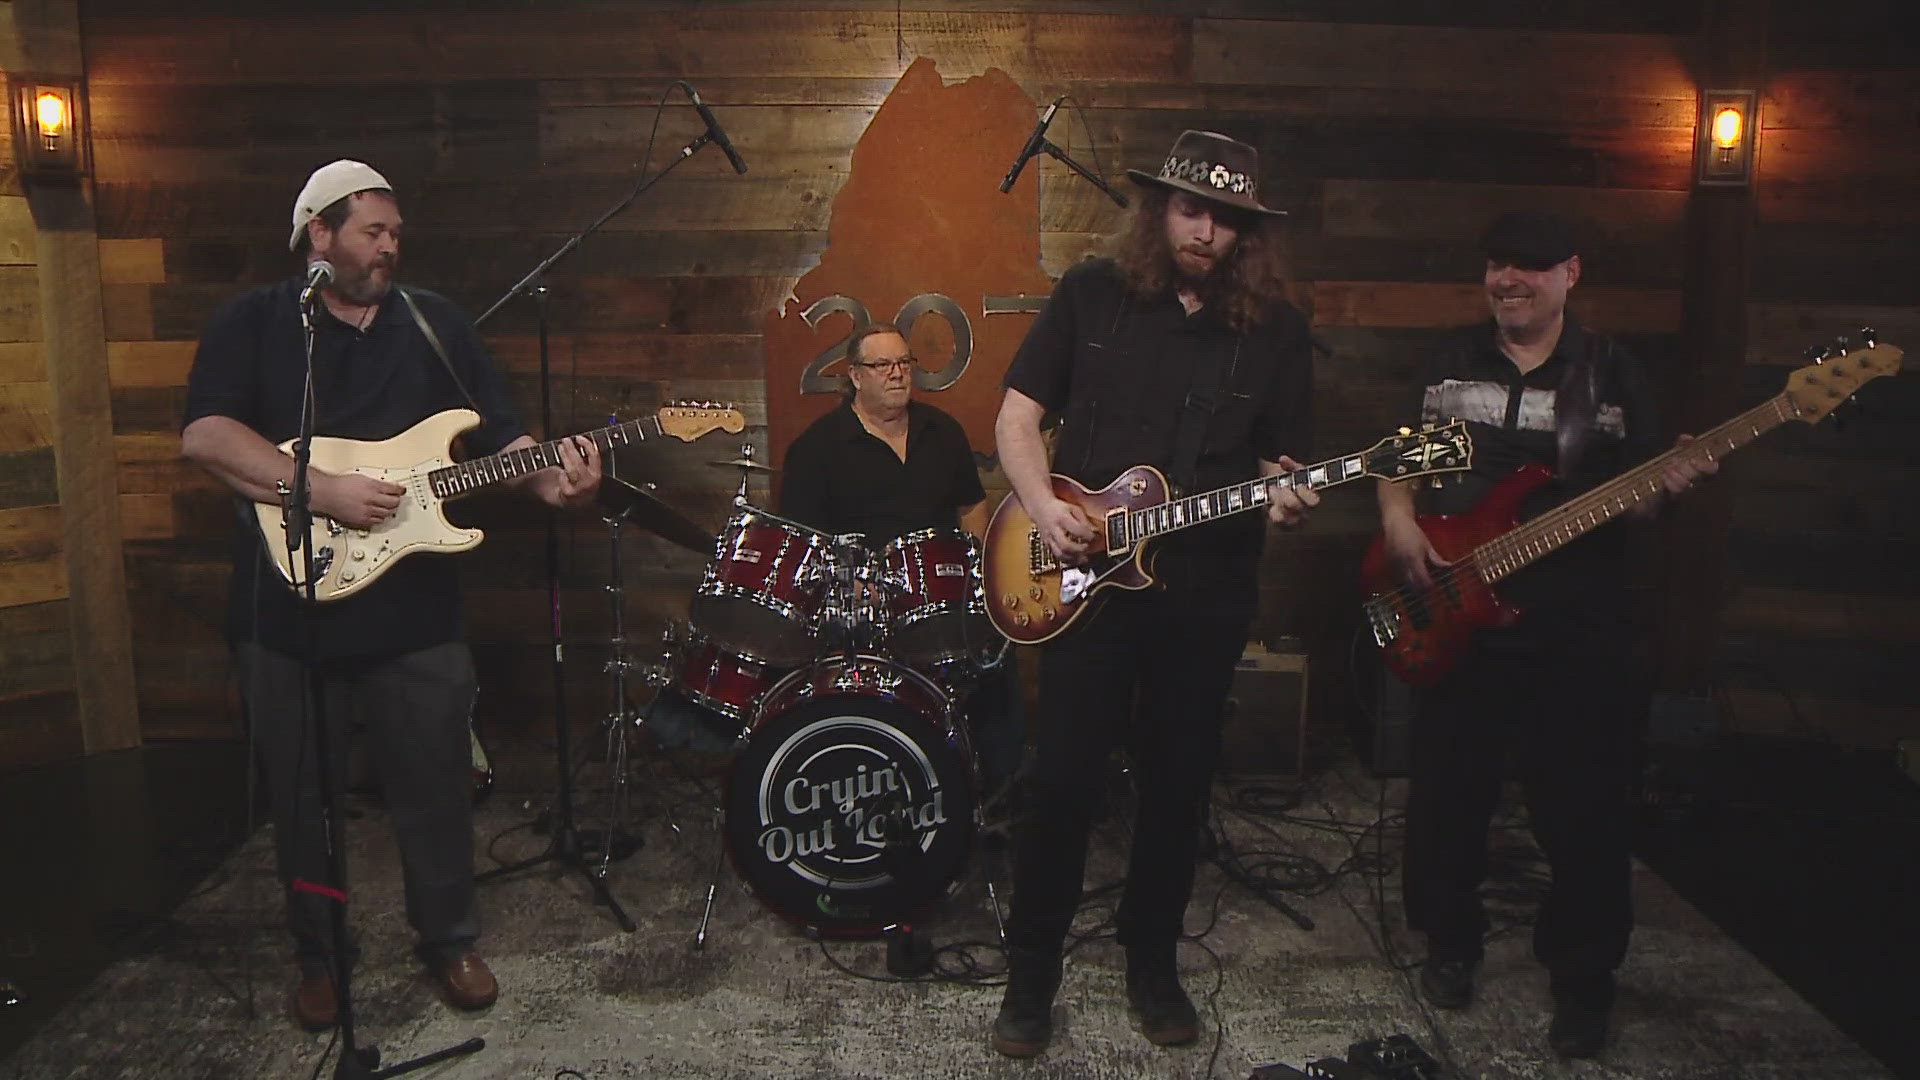 The band joined us in the 207 studio to perform their music and talk to us about the album.